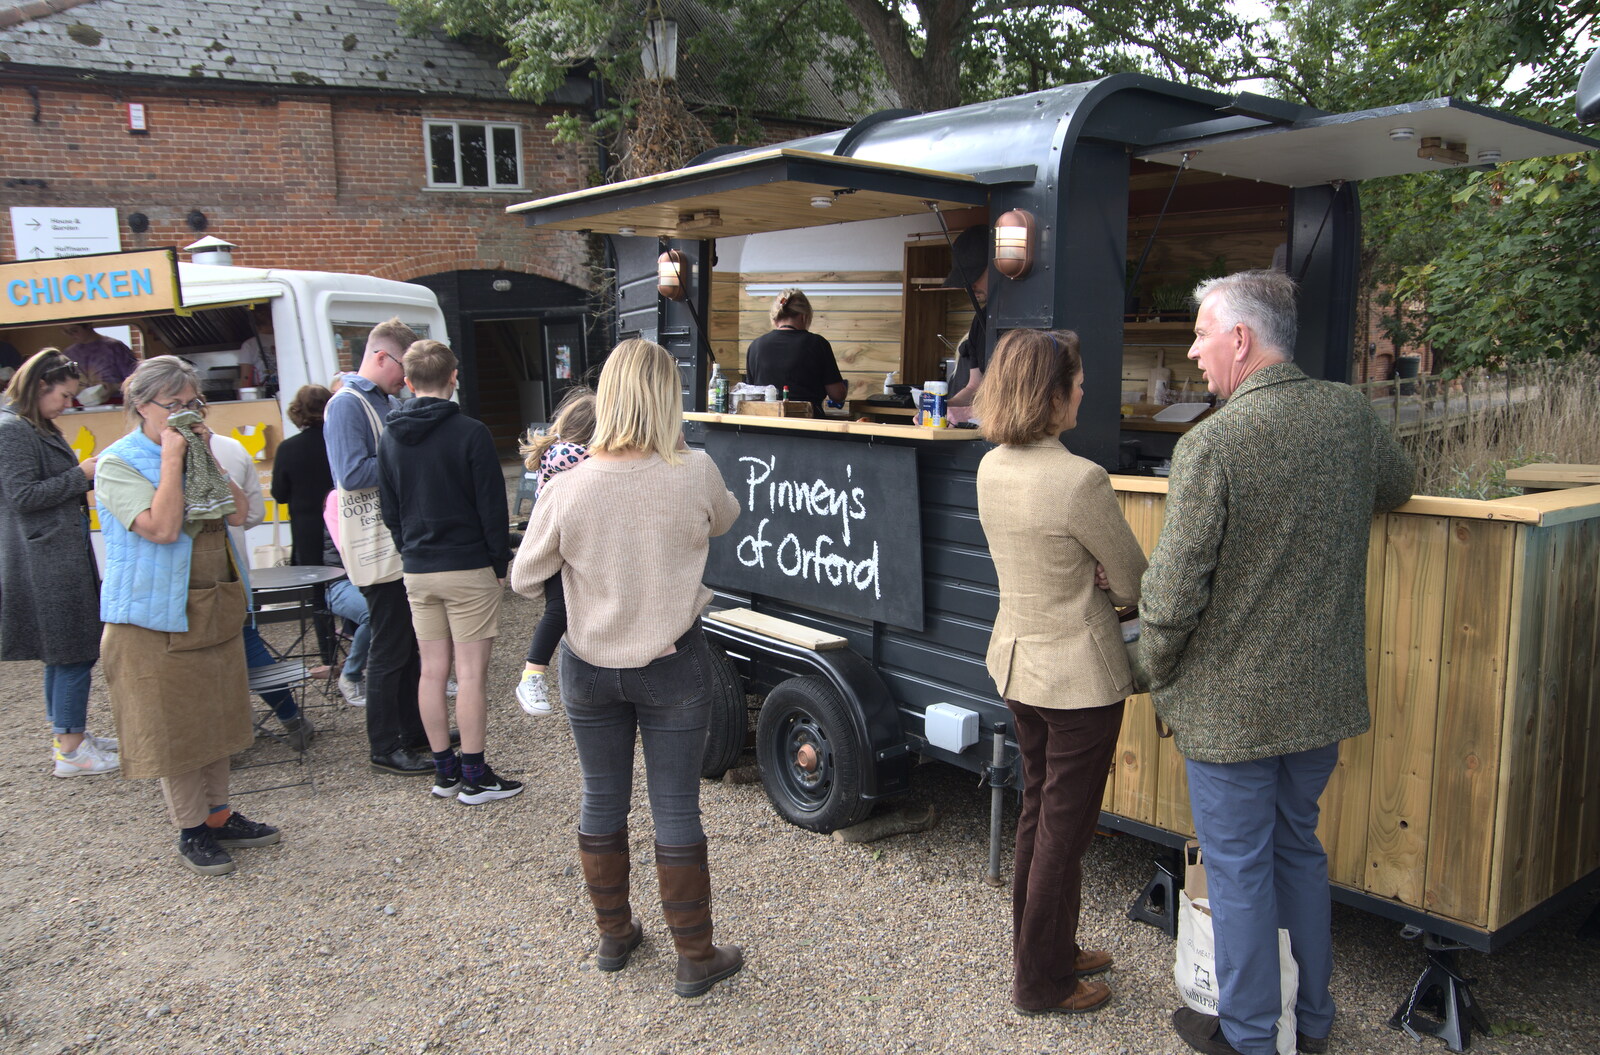 Pinney's of Orford has a food van on the go from The Aldeburgh Food Festival, Snape Maltings, Suffolk - 25th September 2022